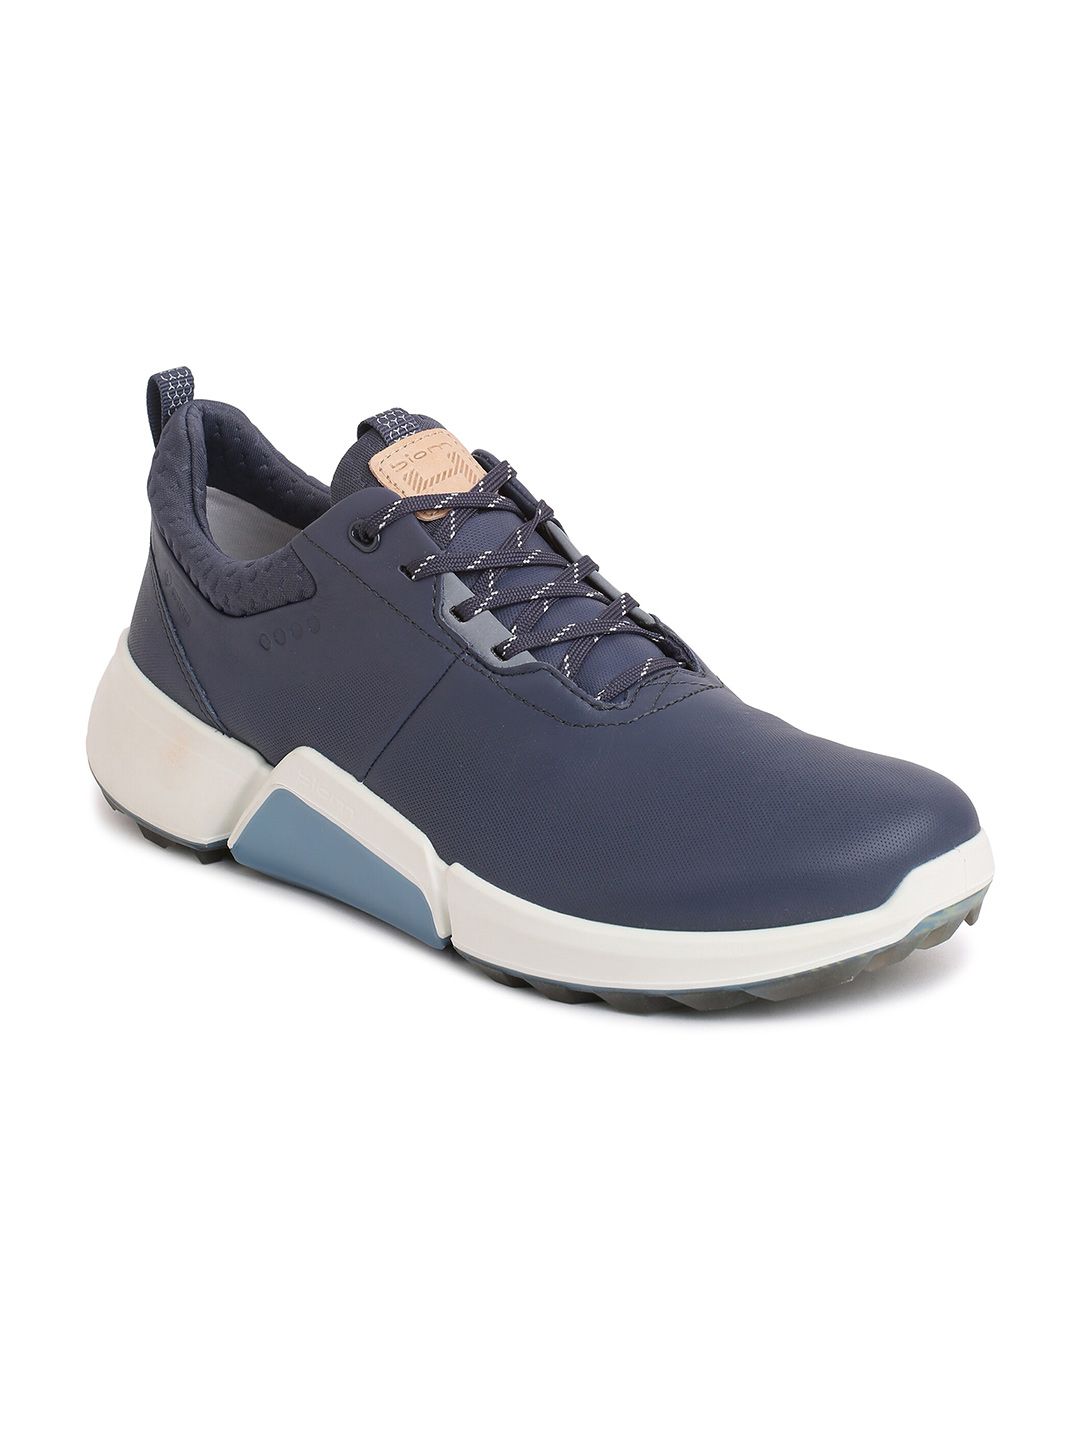 ECCO Women Leather Golf Non-Marking Shoes Price in India